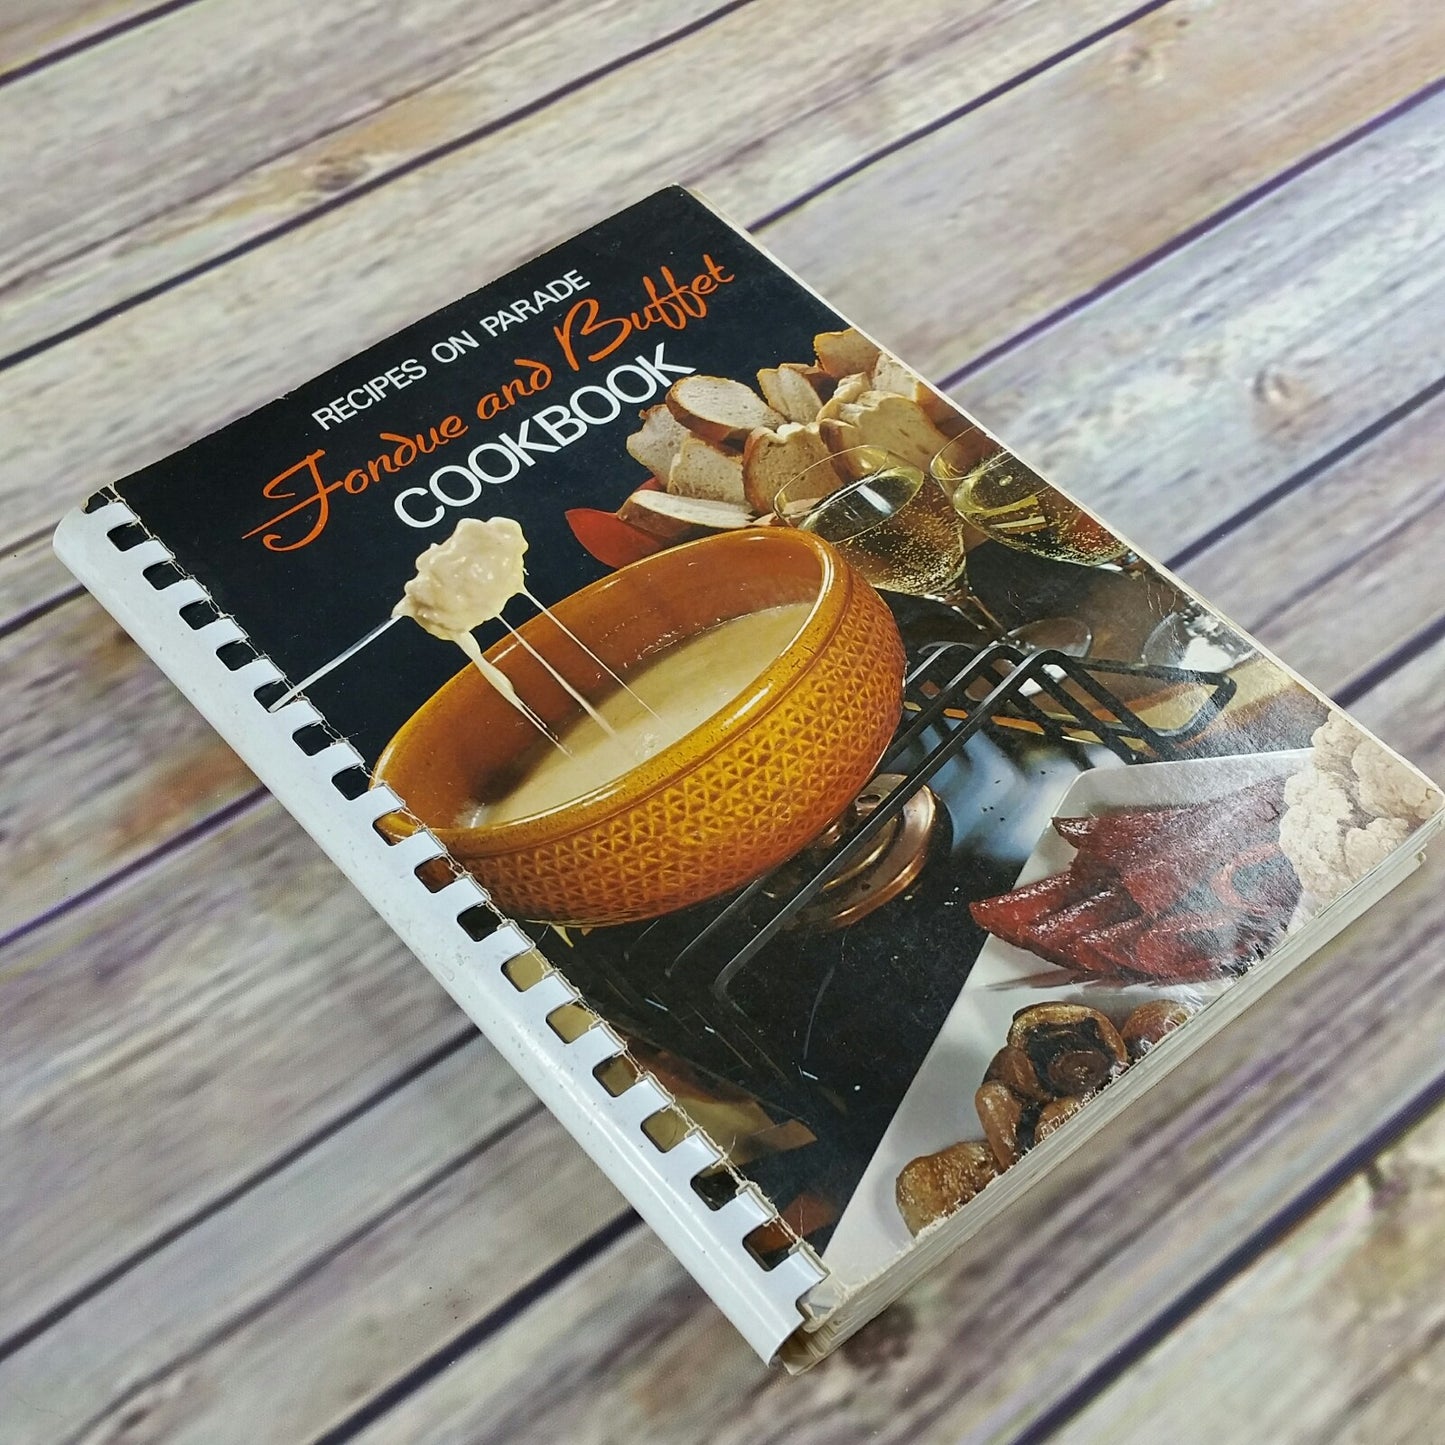 Vintage Cookbook Recipes on Parade Fondue and Buffet Book 1972 Fondue Chafing Dish and Buffet Specialties Recipes Spiral Bound - At Grandma's Table